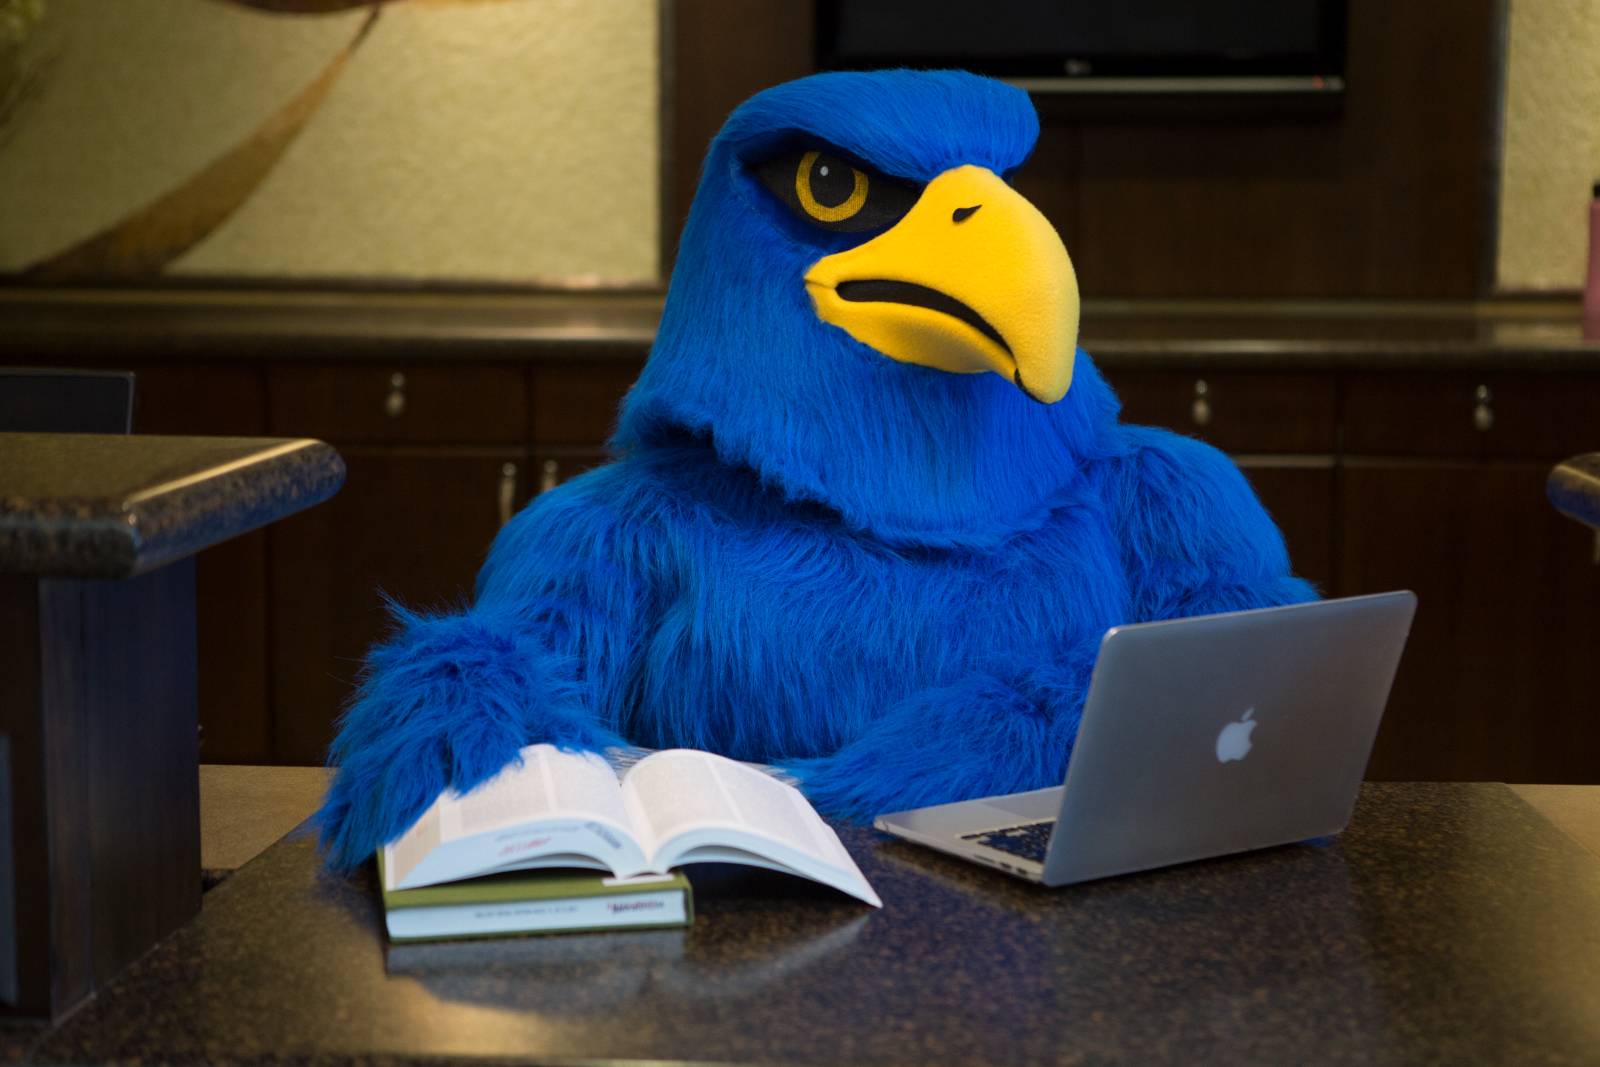 Freddie Falcon at a desk with laptop and books